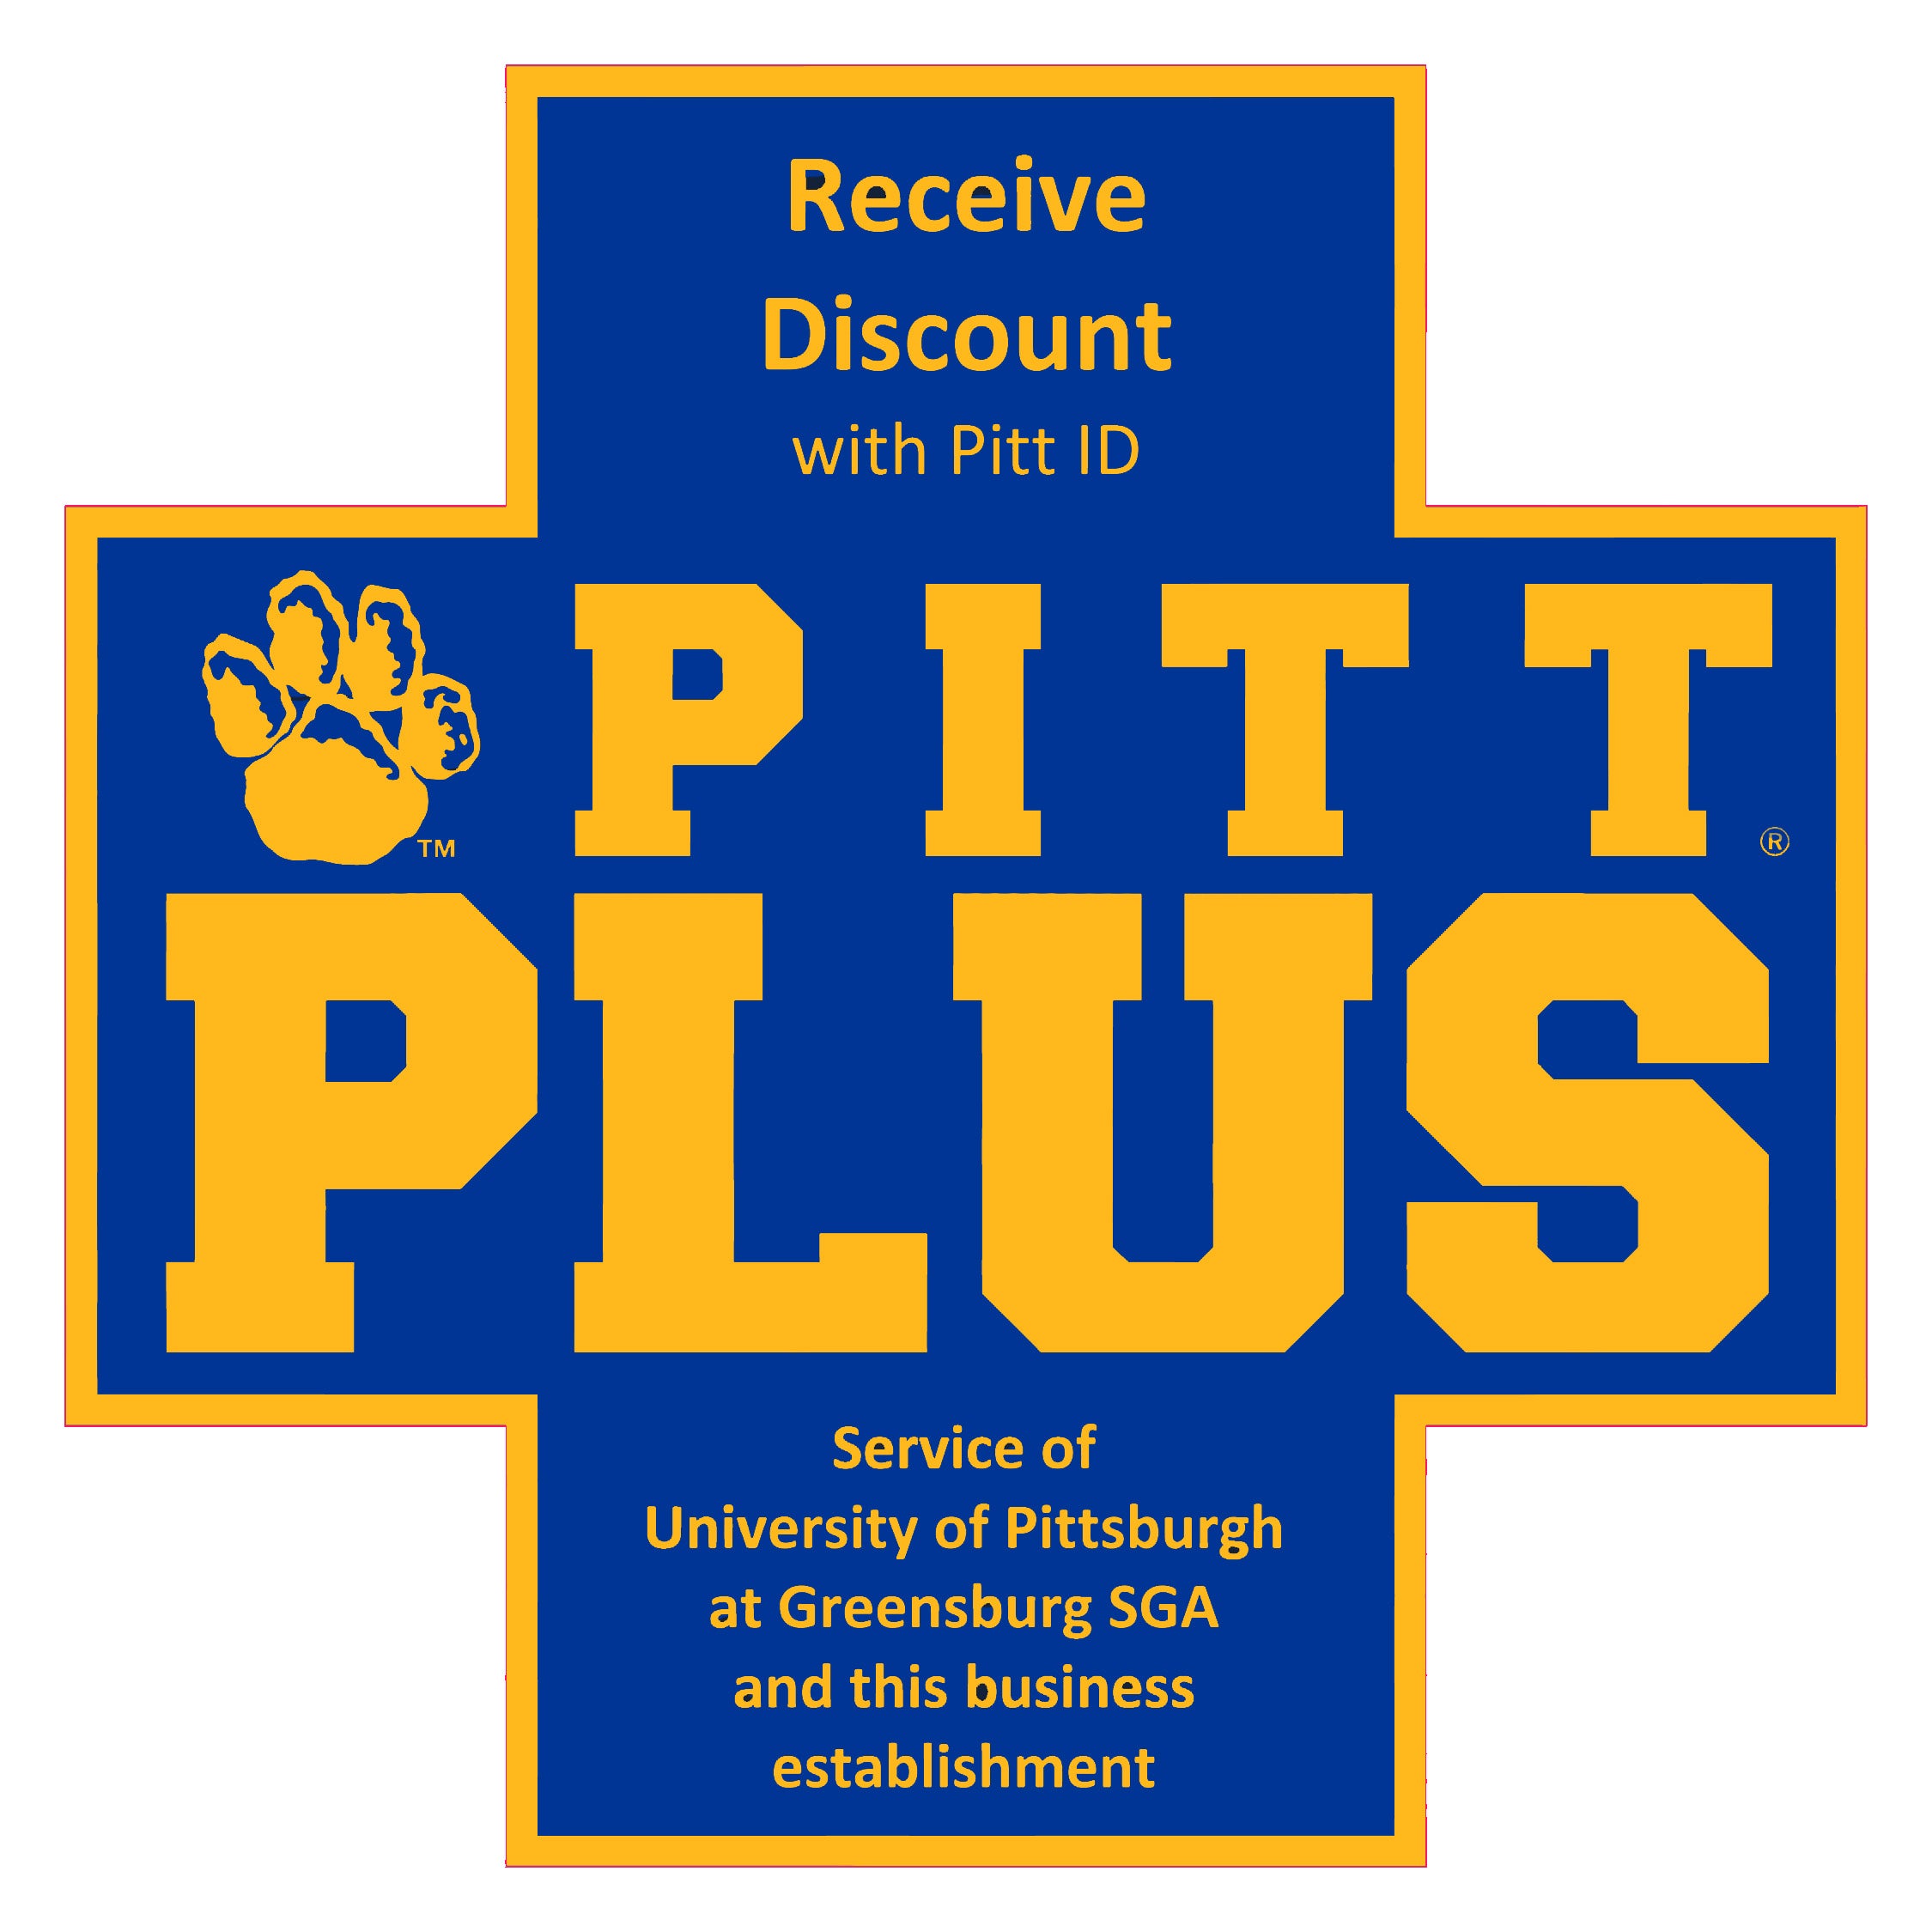 Pitt Plus logo - Receive Discount with Pitt ID, Service of University of Pittsburgh at Greensburg SGA and this business establishment